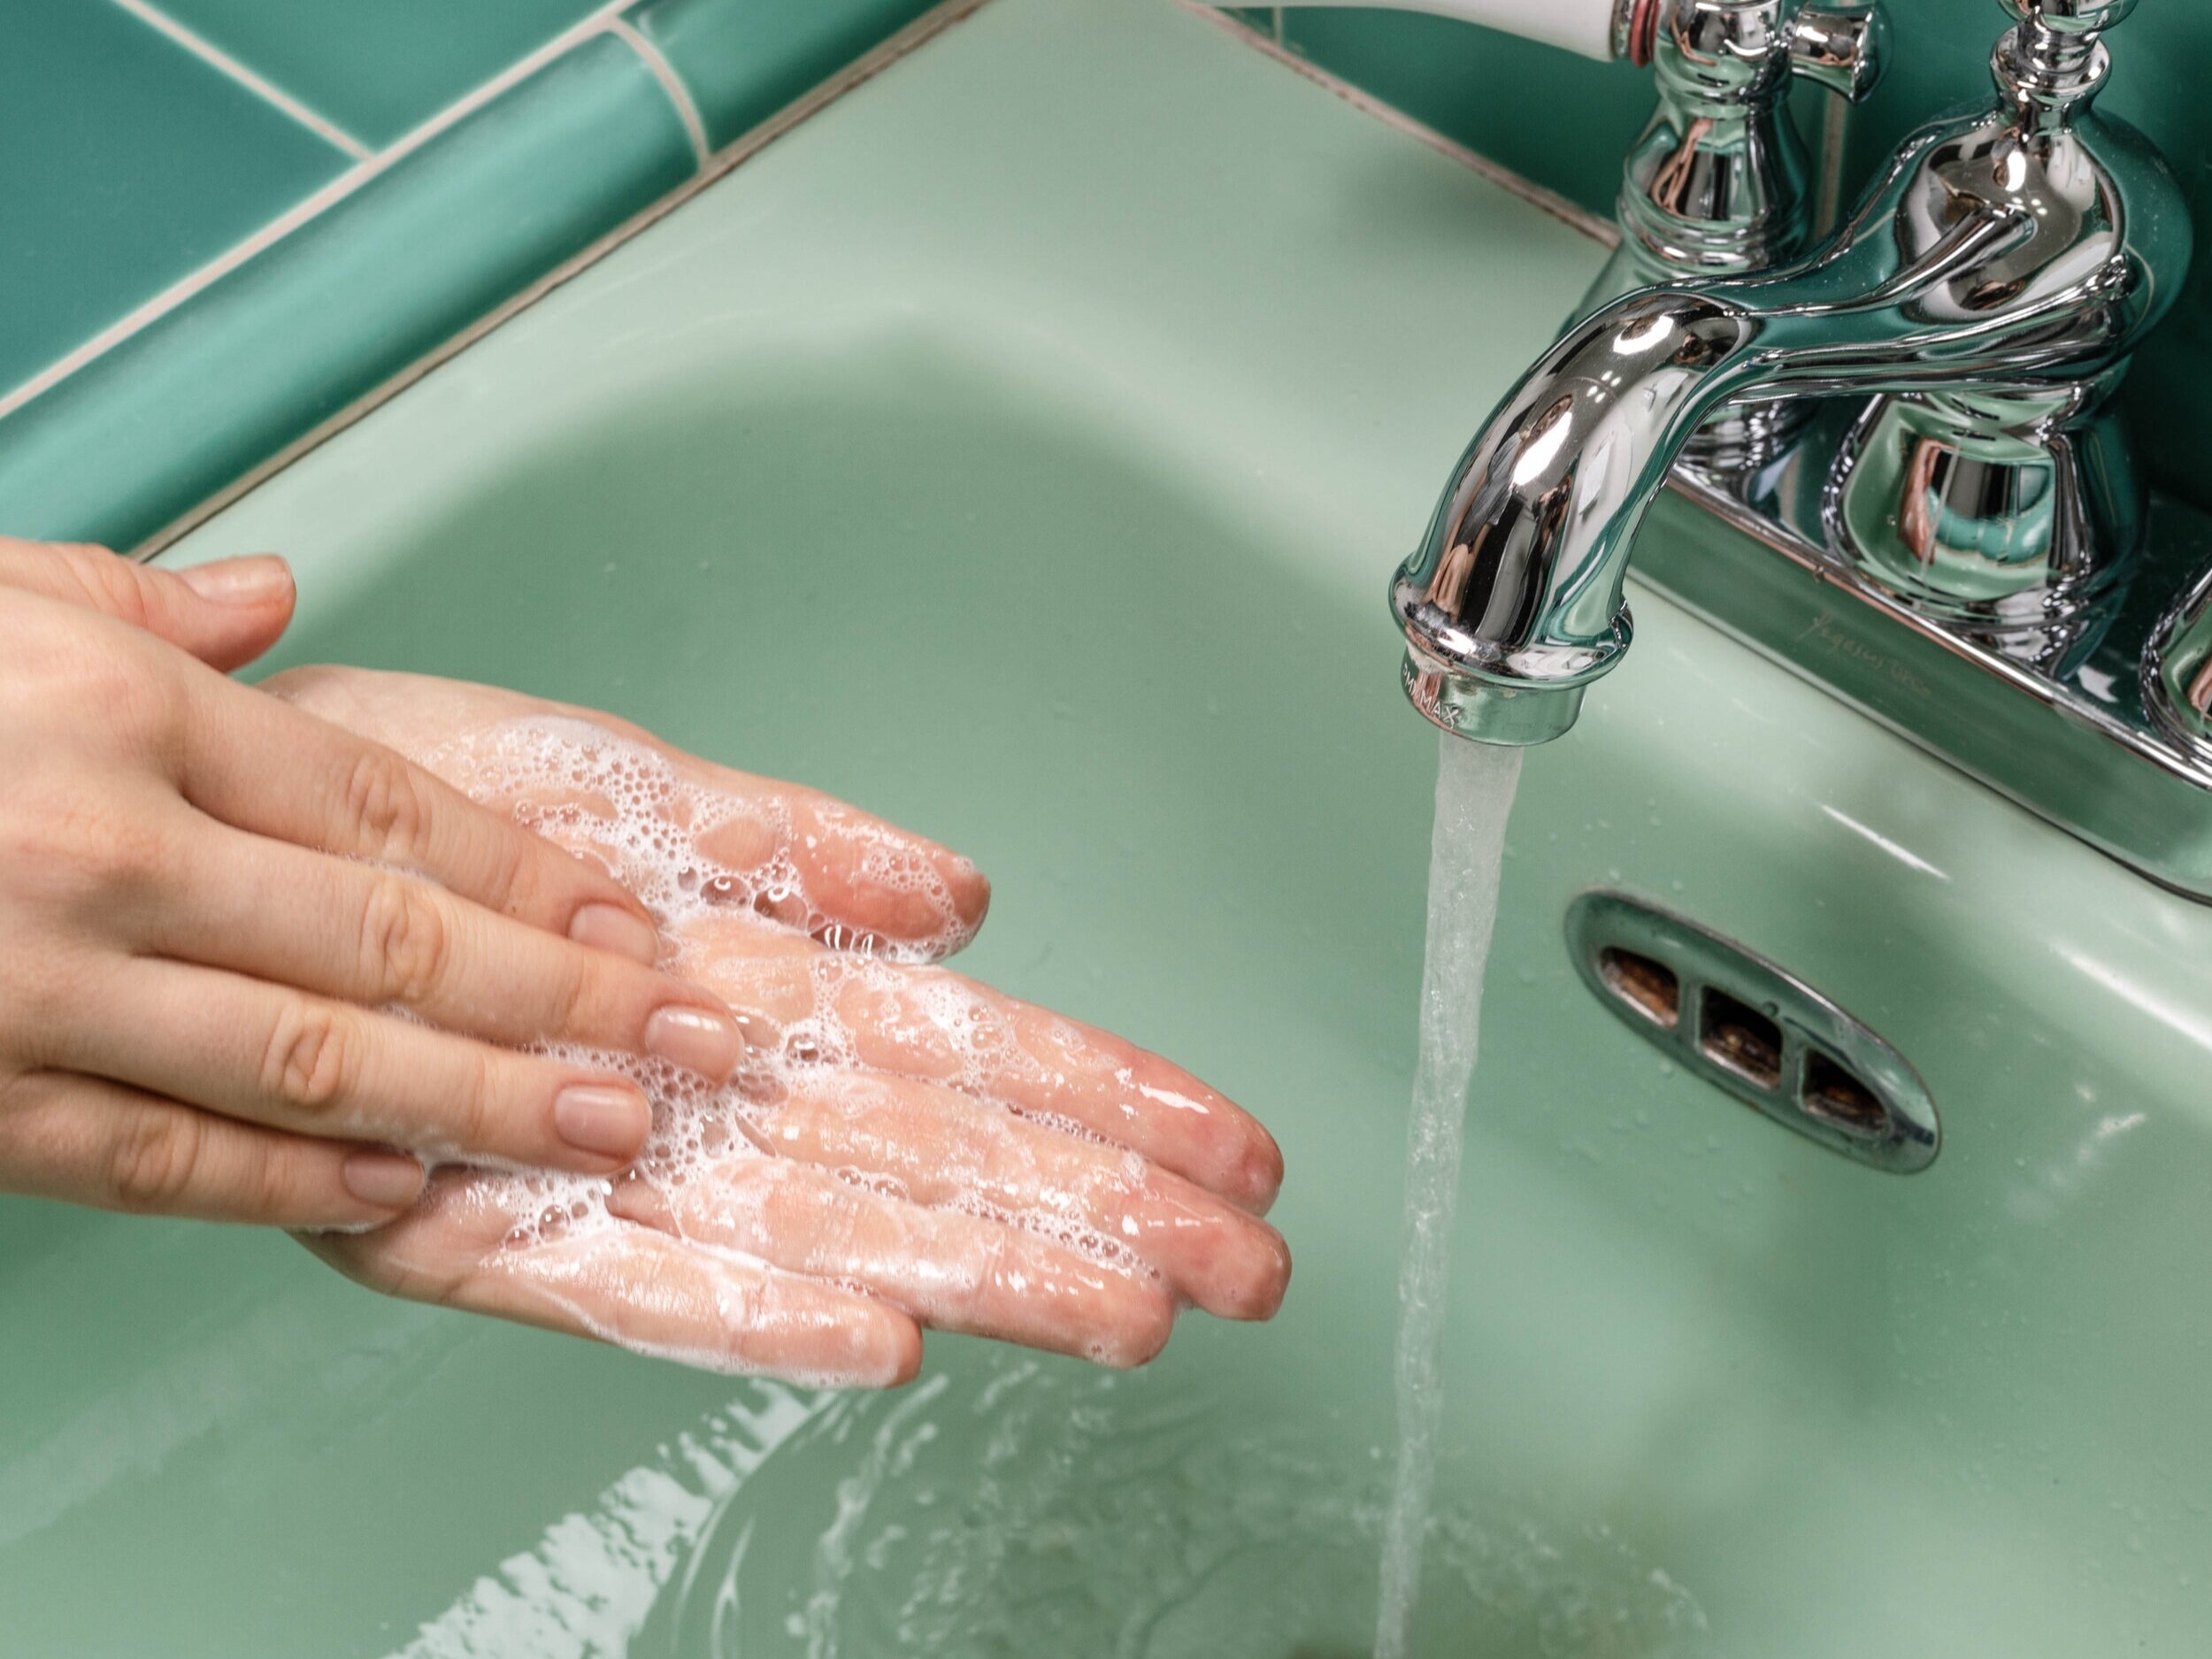 Hand washing is the single most effective way to prevent the spread of infections